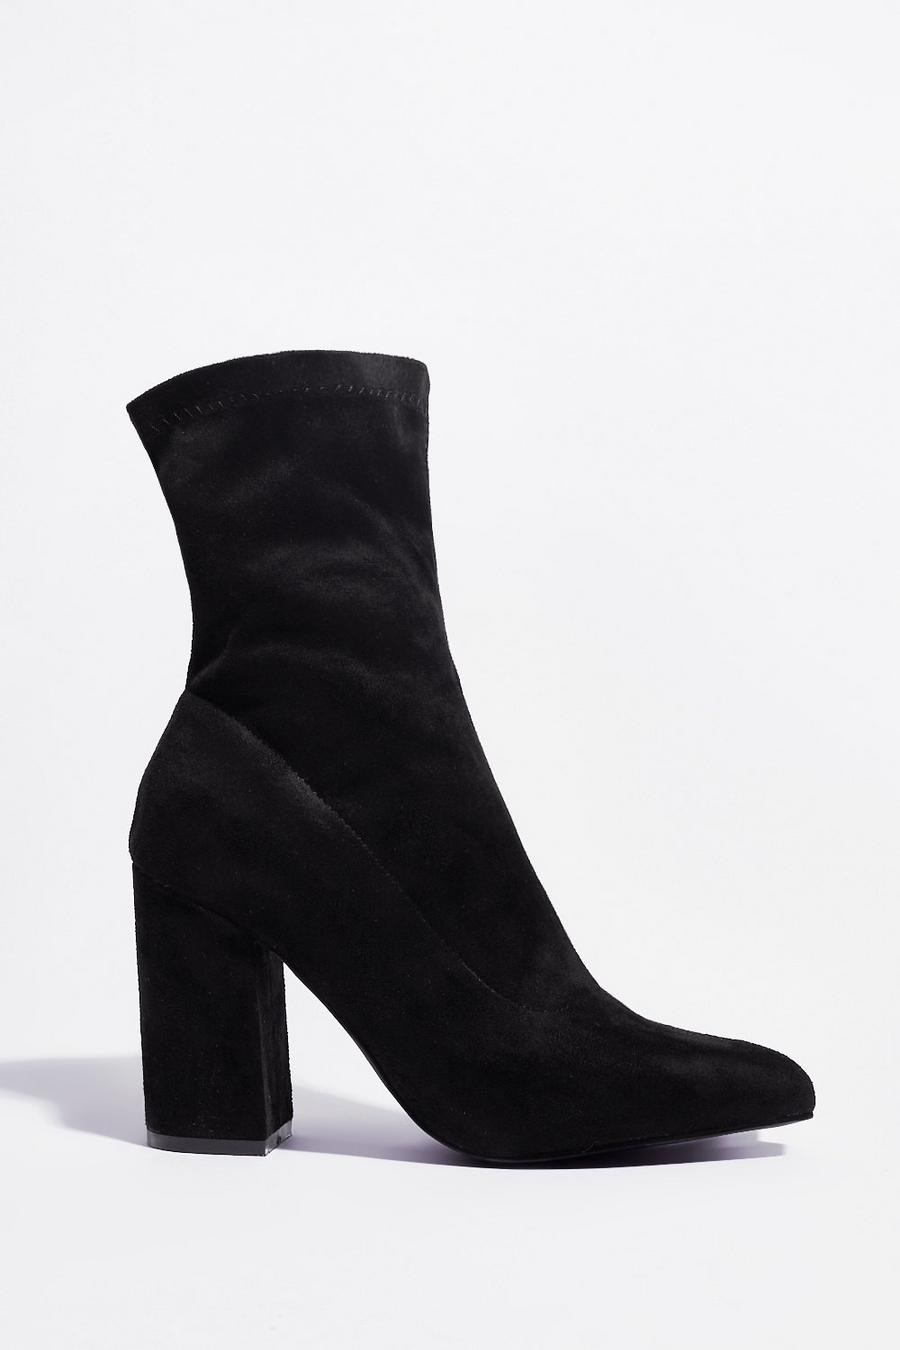 Black Faux Suede Pointed Toe Heeled Boots